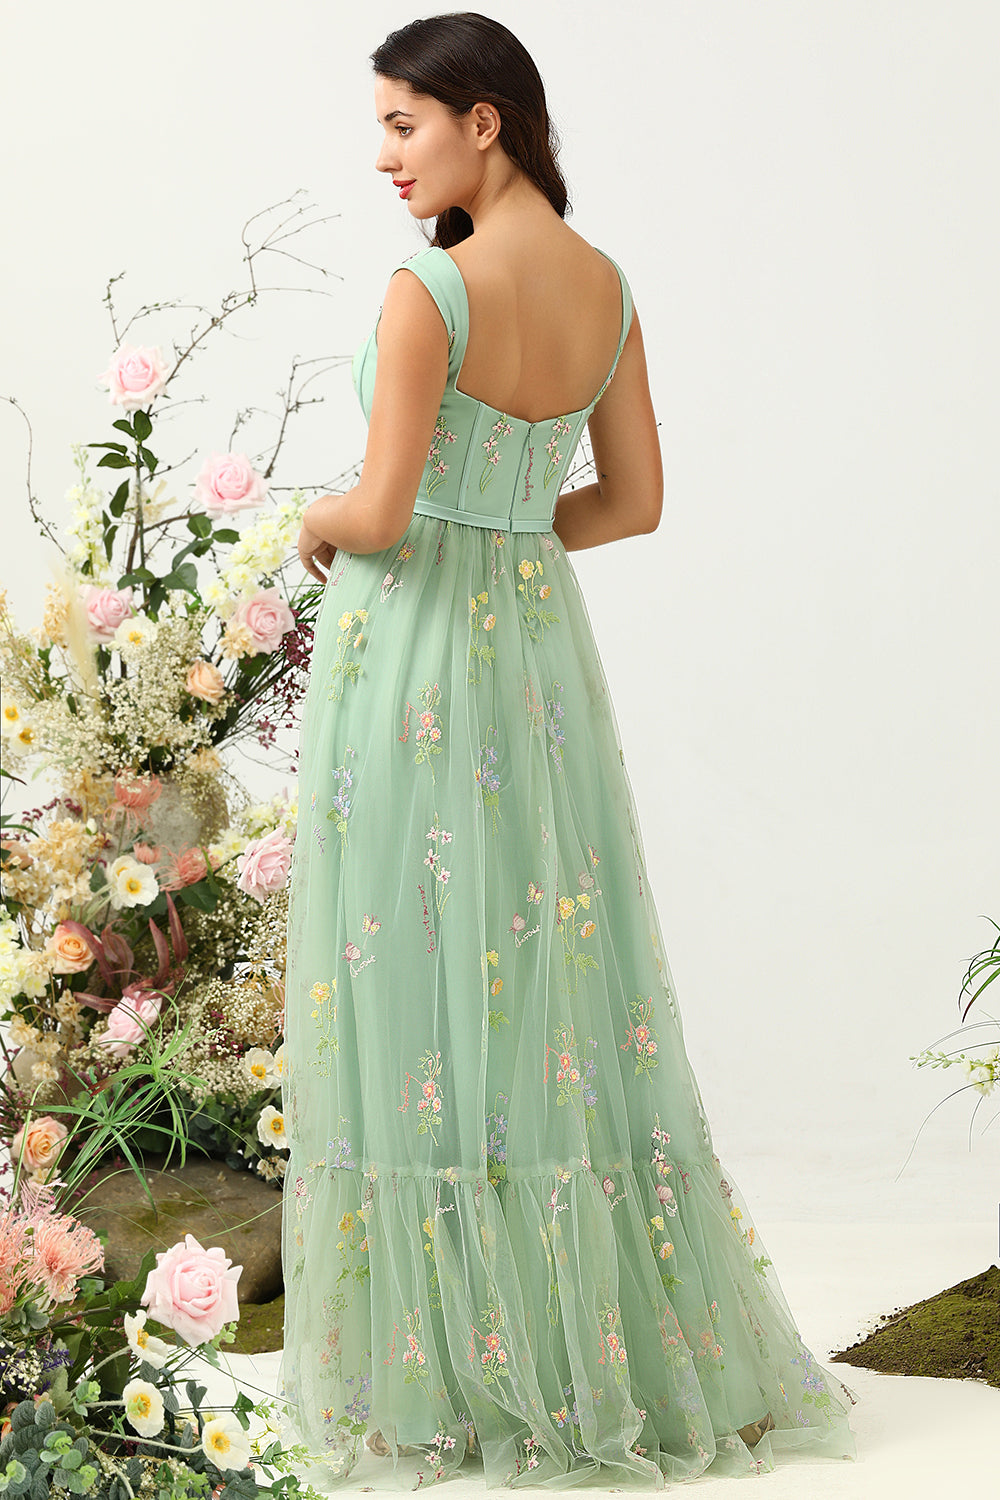 Green A-Line Square Neck Long Formal Party Dress with Embroidery